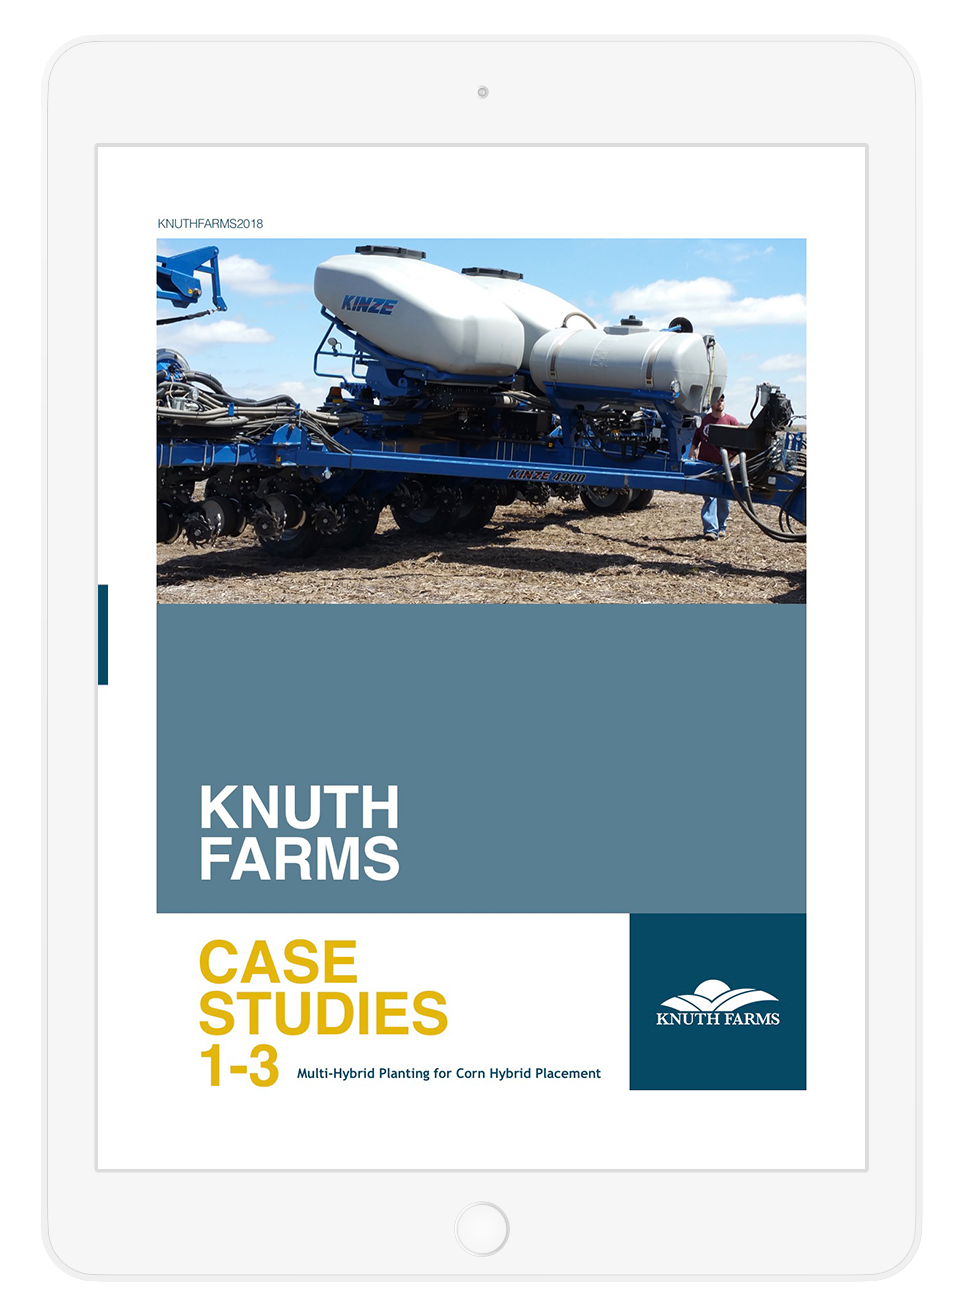 Knuth farms case studies 1-3 multi-hybrid planting for corn hybrid placement